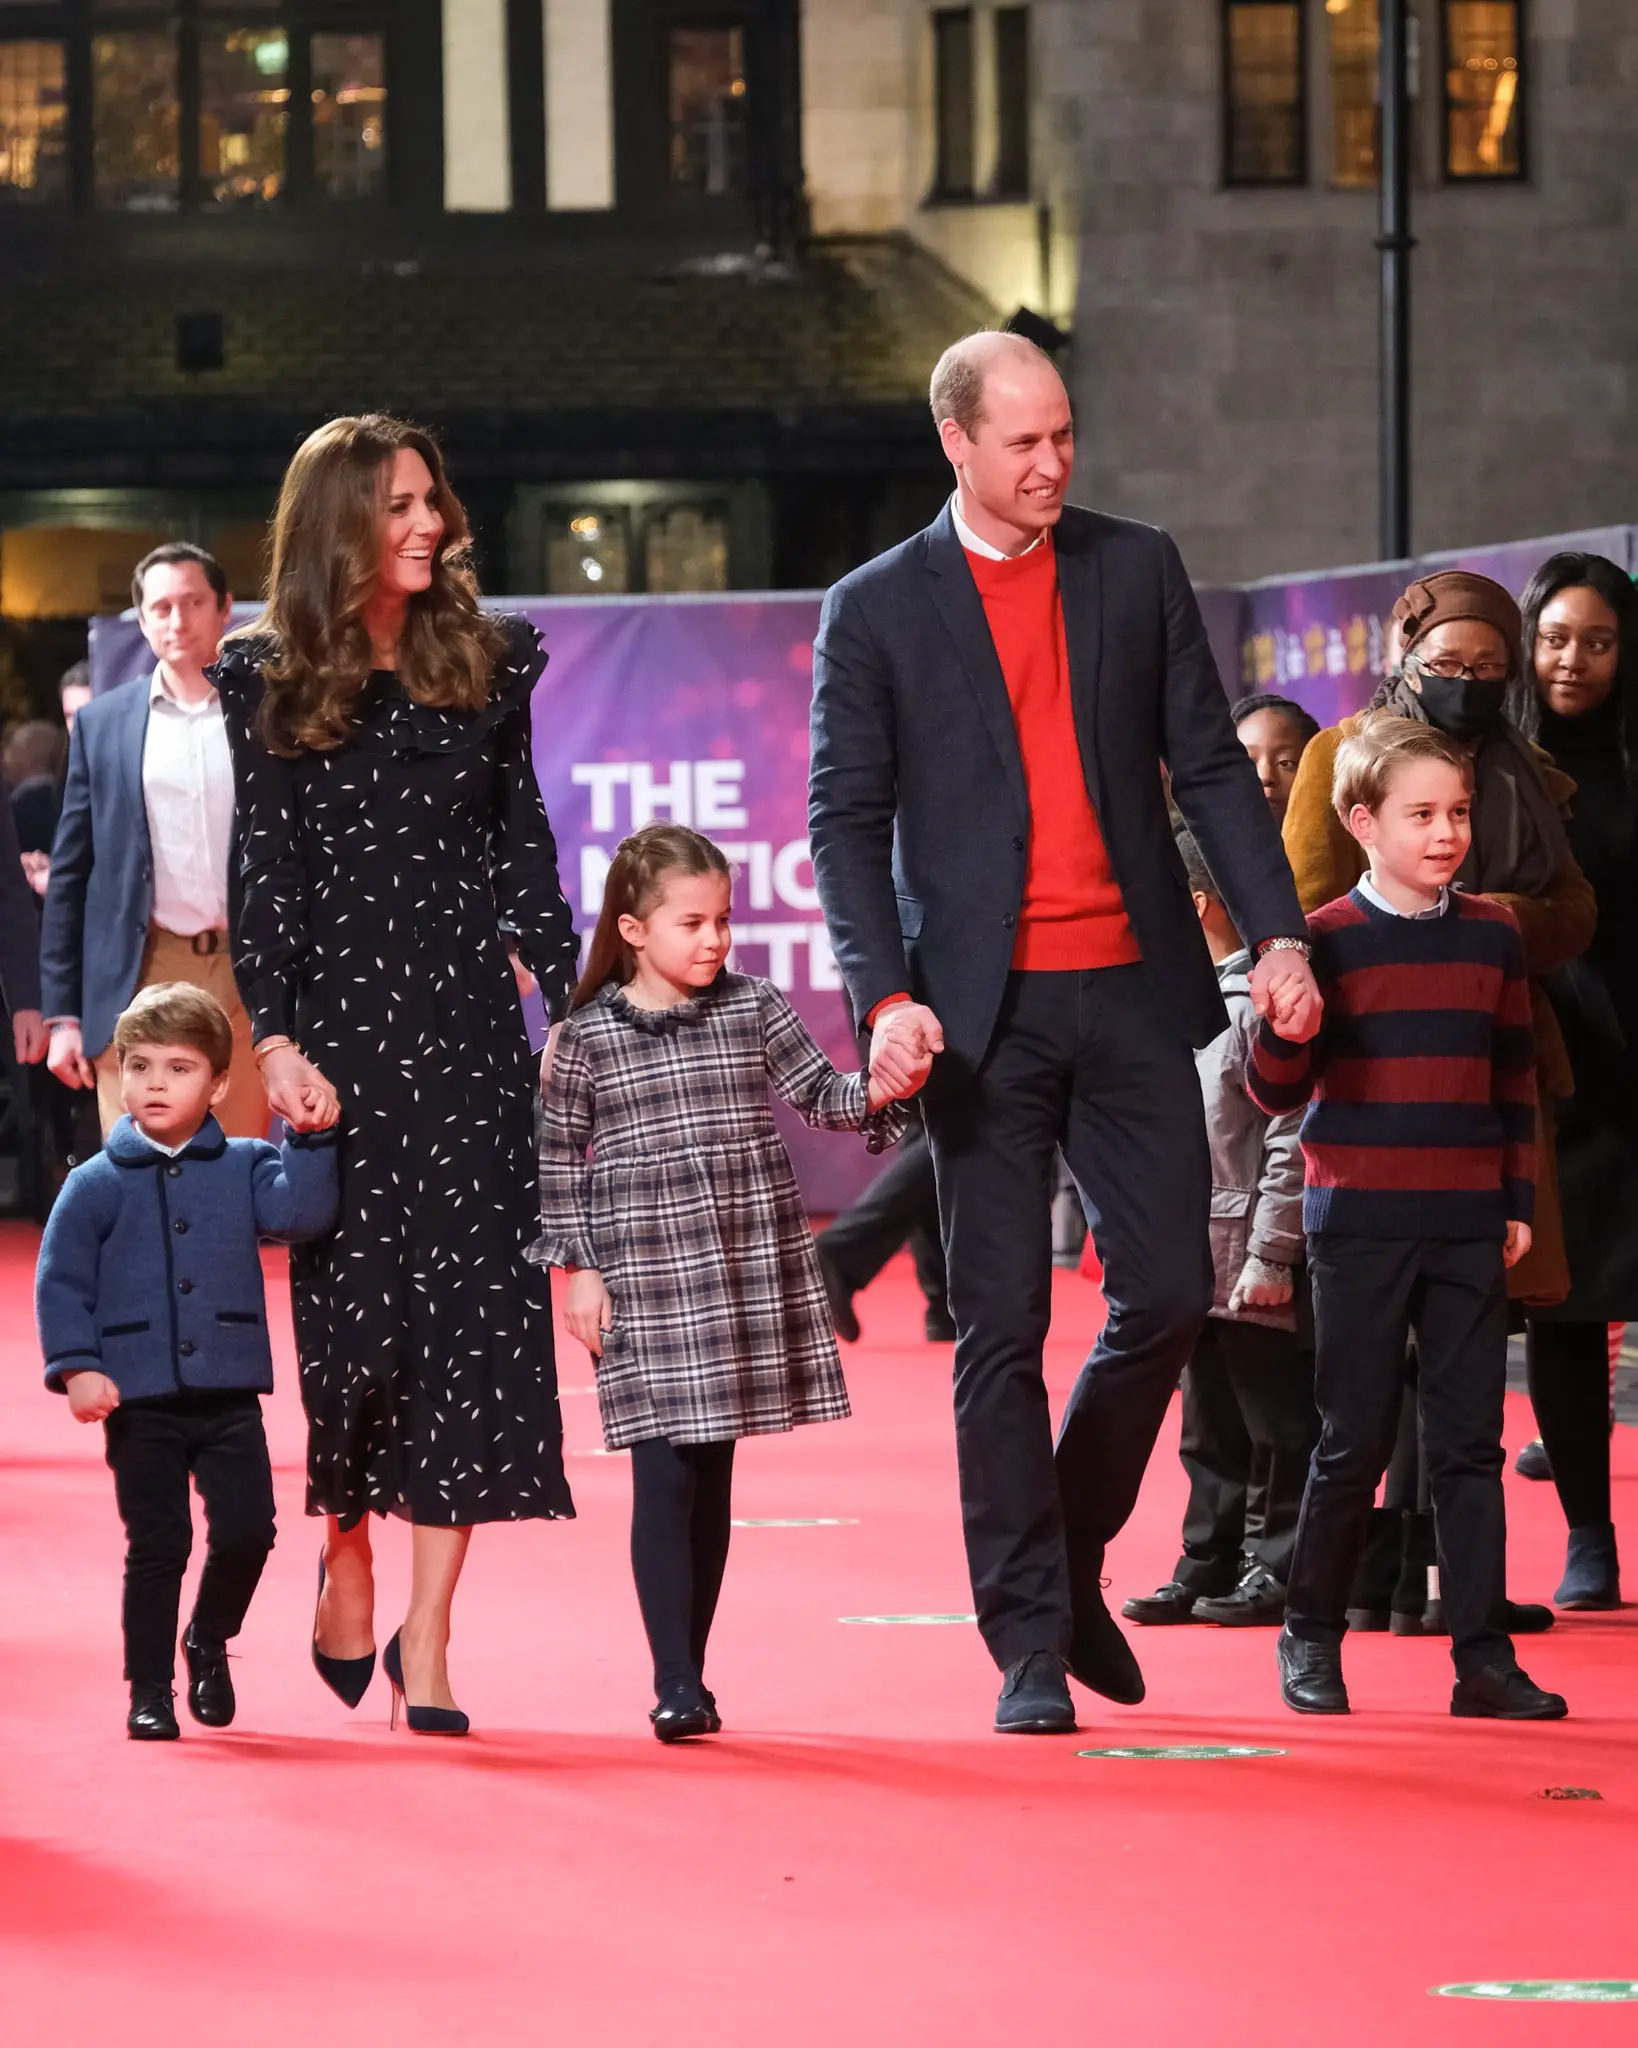 The Duke and Duchess of Cambridge attended a special performance of The National Lottery’s Pantoland at The Palladium with Prince George, Princess Charlotte and Prince Louis